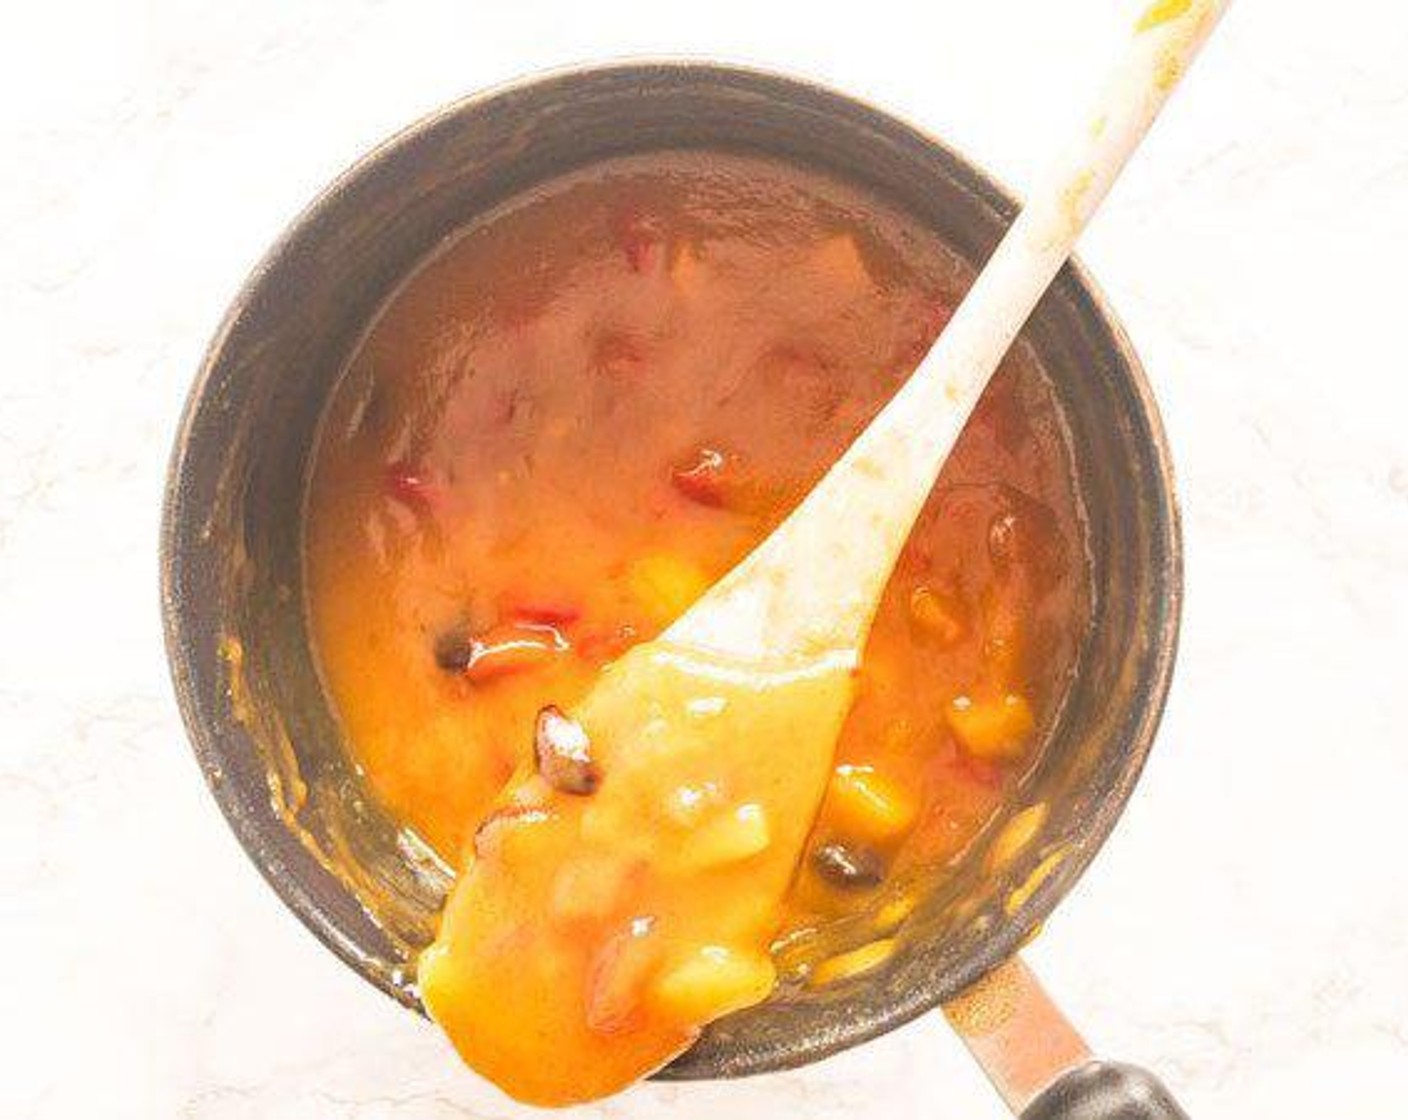 step 2 Add mangoes, Brown Sugar (1/3 cup), Red Chili Pepper (1/4 cup), Apple Cider Vinegar (1 Tbsp), Raisins (1 Tbsp), Ground Ginger (1 tsp), and Cayenne Pepper (1/4 tsp) to a pot and cook on stove top until bubbling, stirring continuously for about 2 minutes.